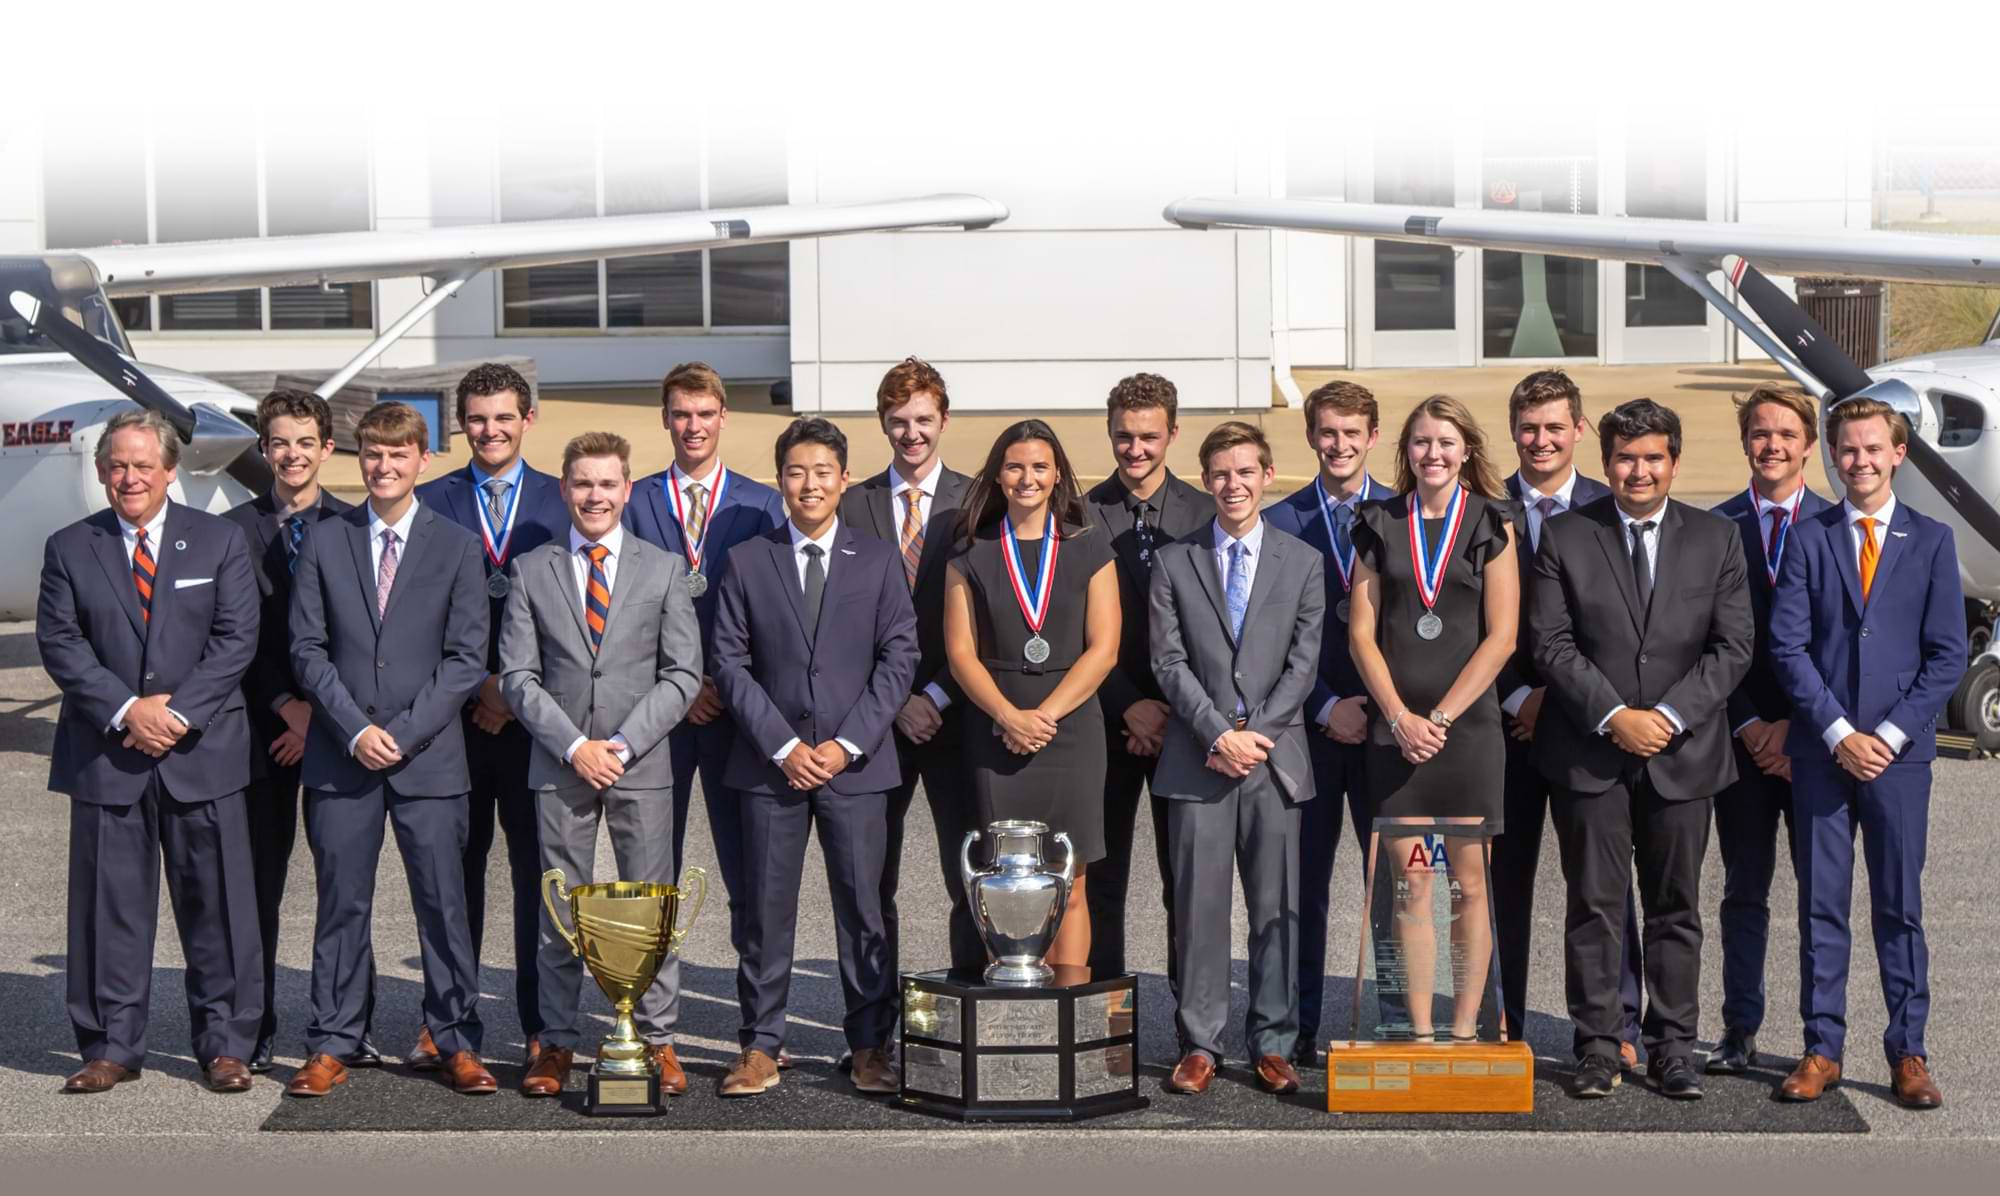 Aviation students and instructors group photo in front of trophies